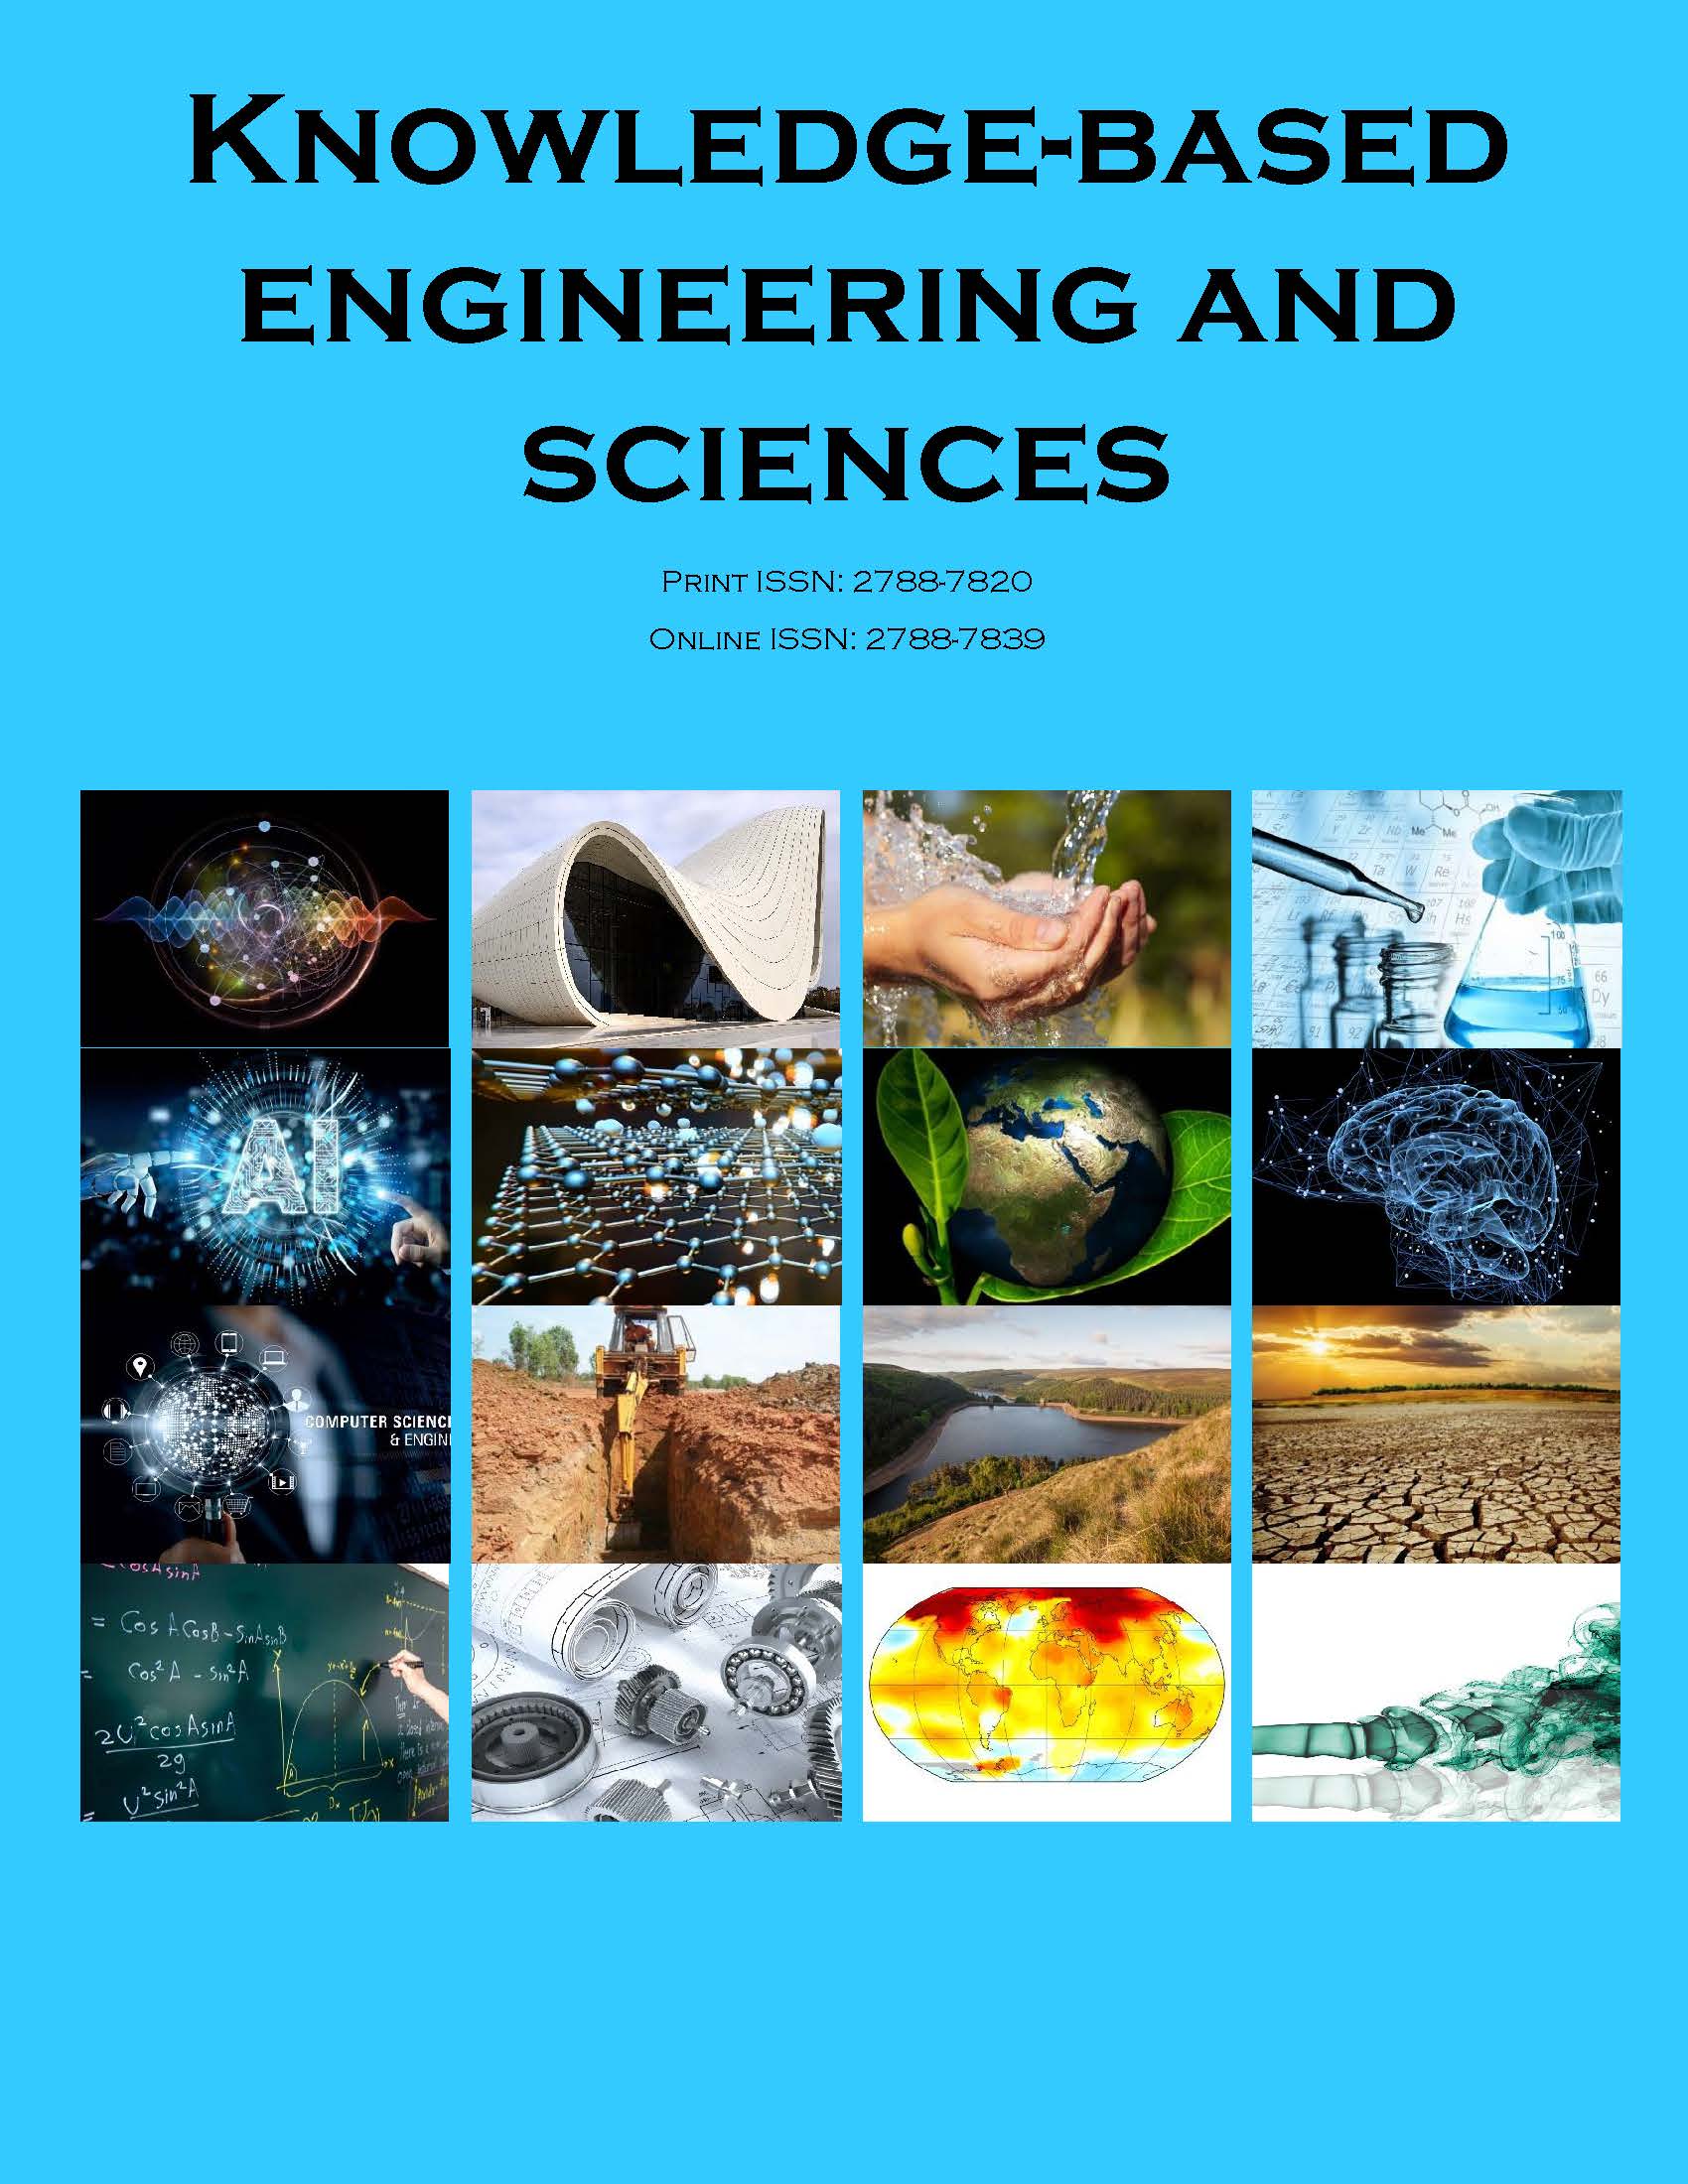 Knowledge-based engineering and sciences (KBES)